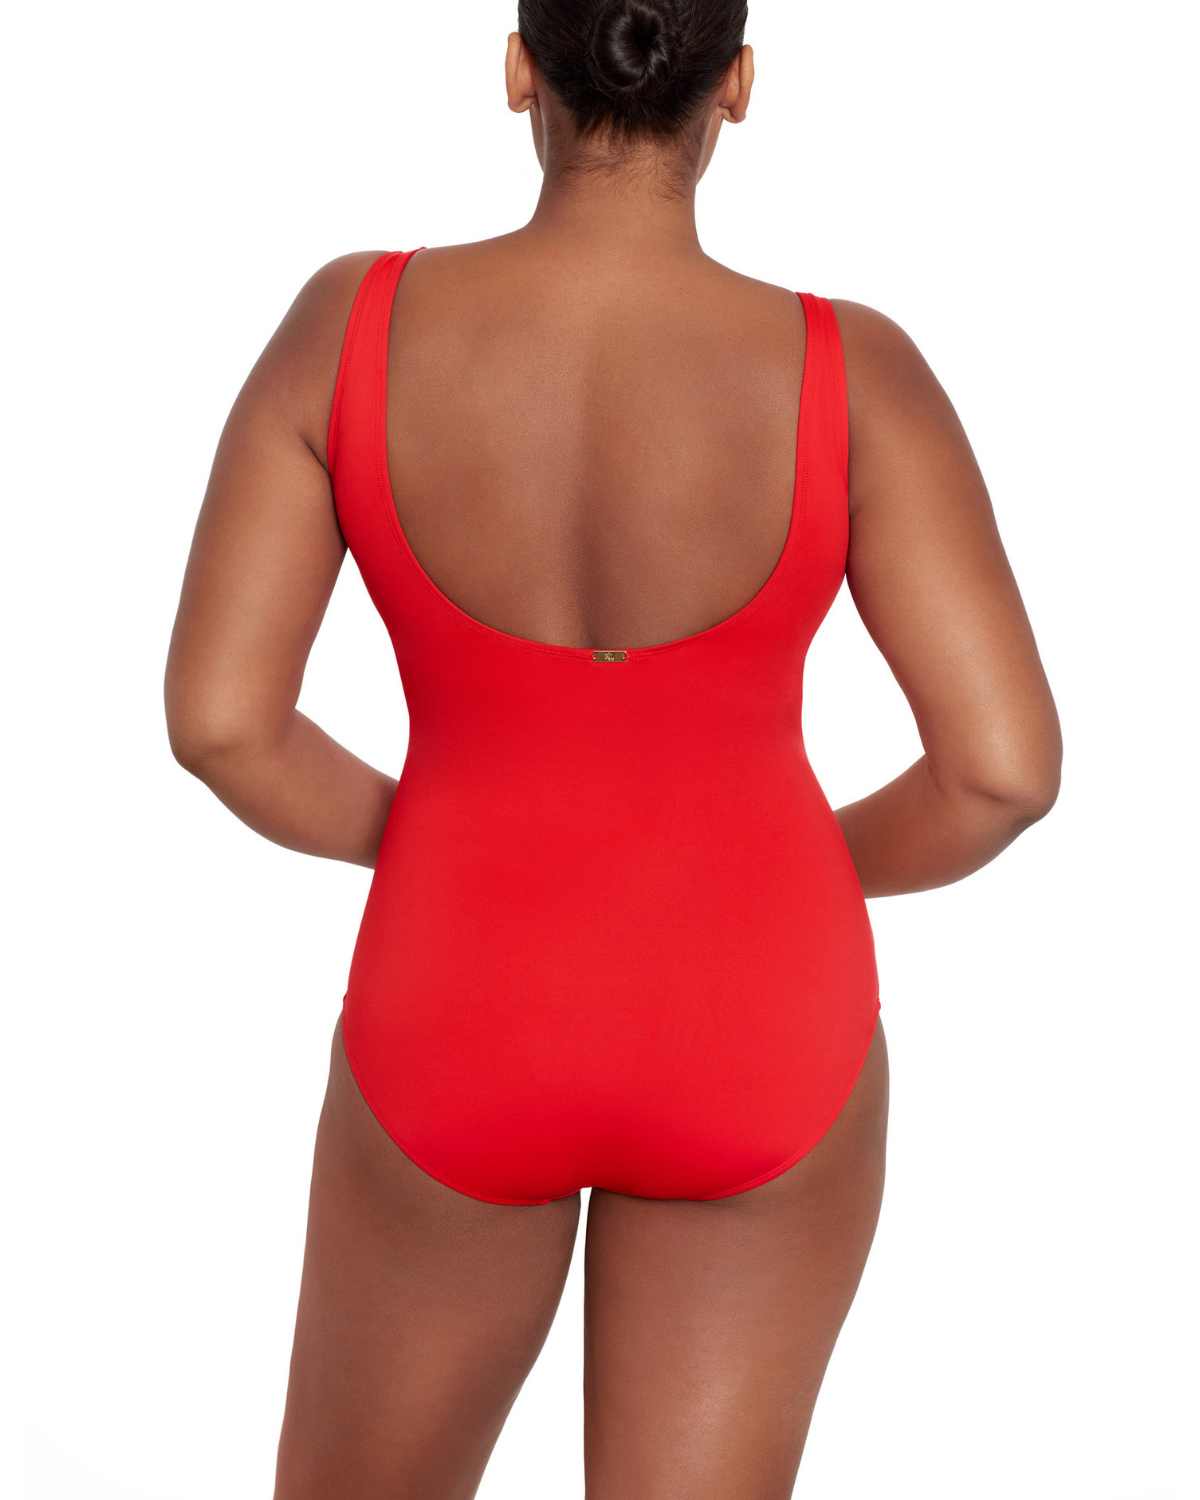 Model wearing a v-neck one piece with a ruffle trim and shirred panel around the torso in red